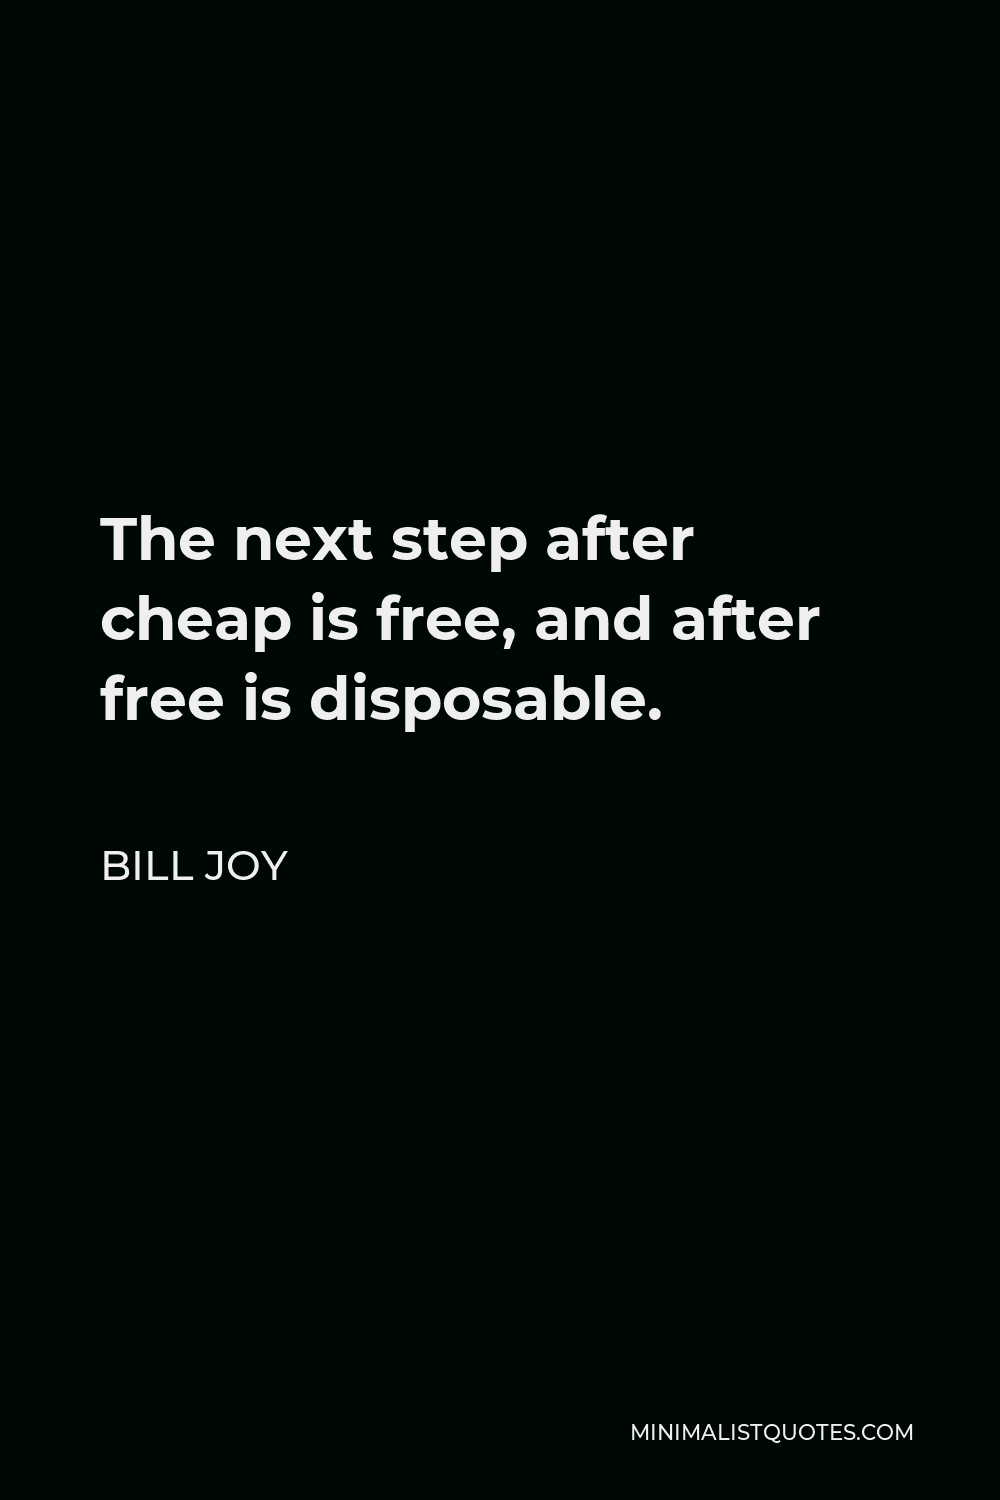 Bill Joy Quote - The next step after cheap is free, and after free is disposable.